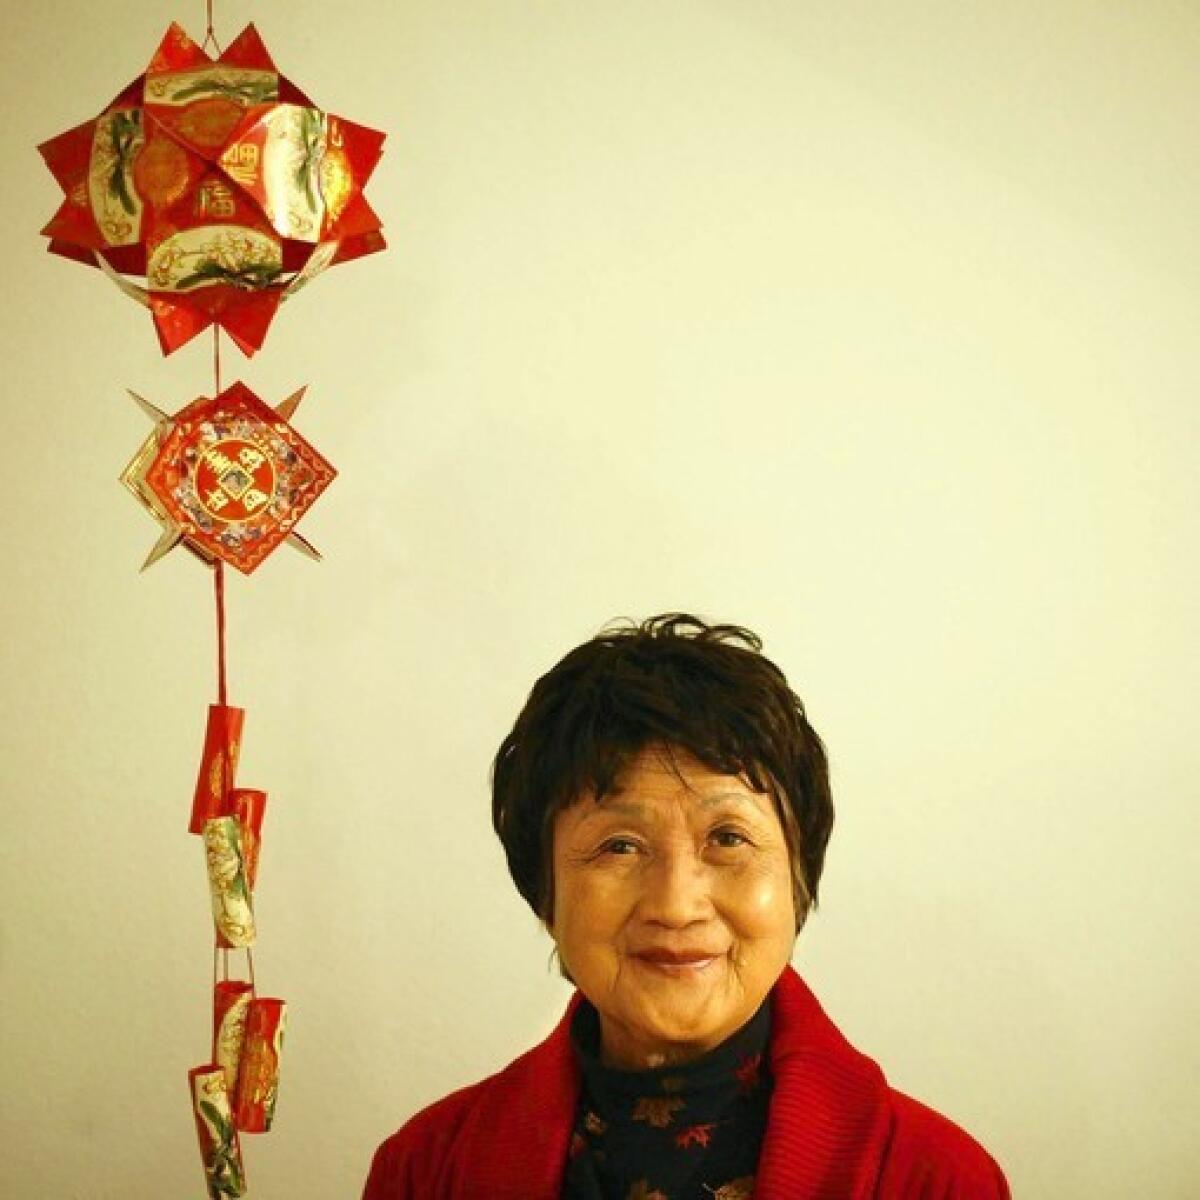 Tina Wong influences her granddaughter's Christmas dinners with traditional Chinese dishes served alongside traditional American cuisine.